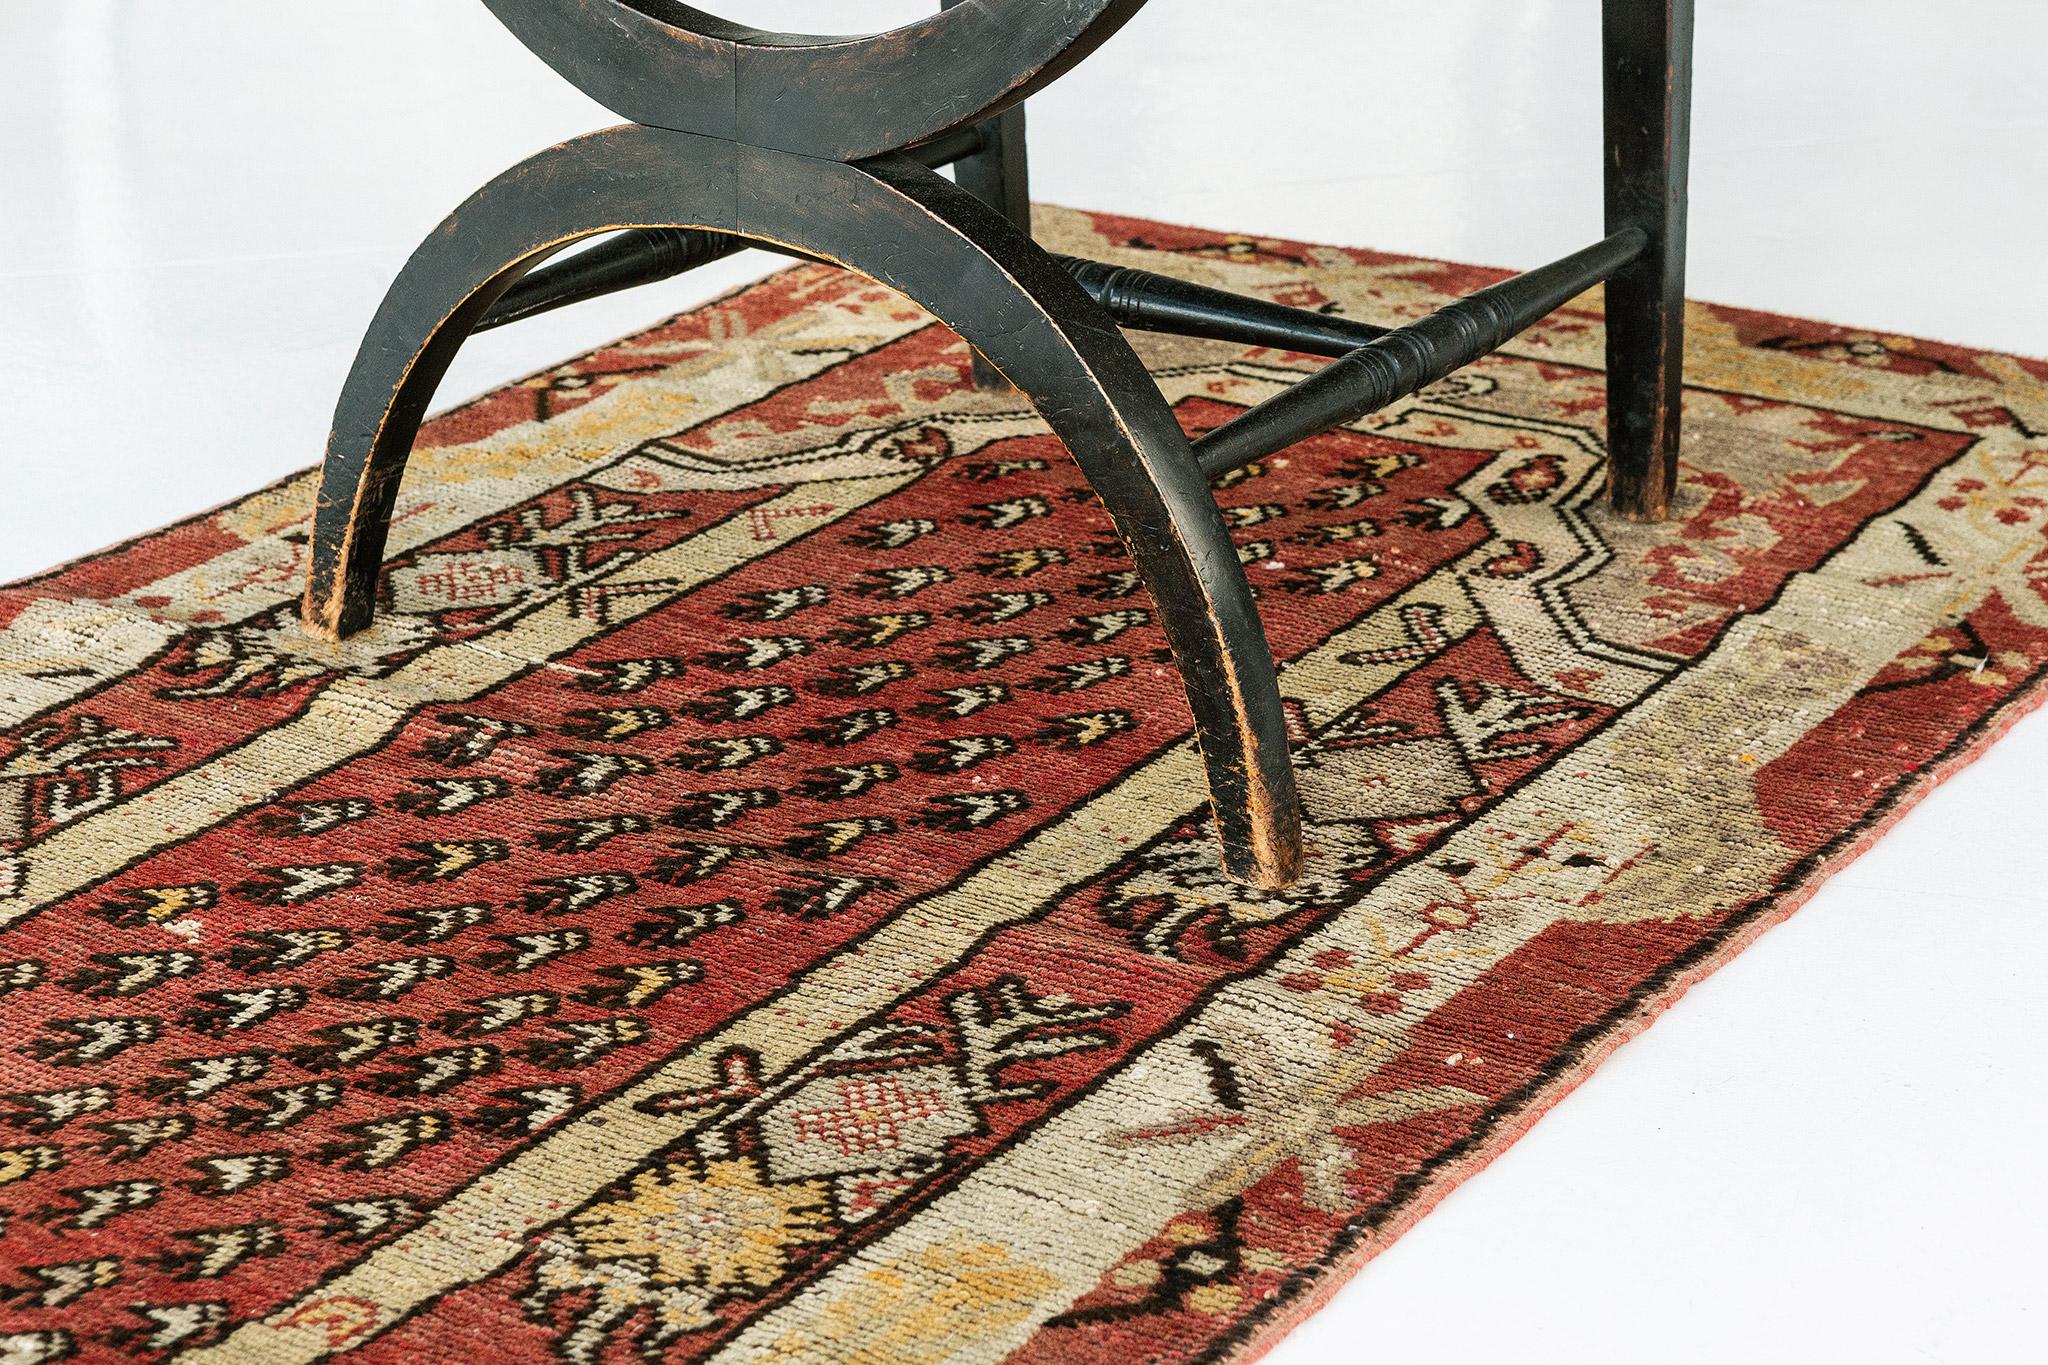 Impressive in style and scale, this Vintage Turkish Anatolian rug features an overall luxurious composition depicting age-old Anatolian motifs. In the Classic Turkish style, the highly decorative all-over botanical details are displayed in an